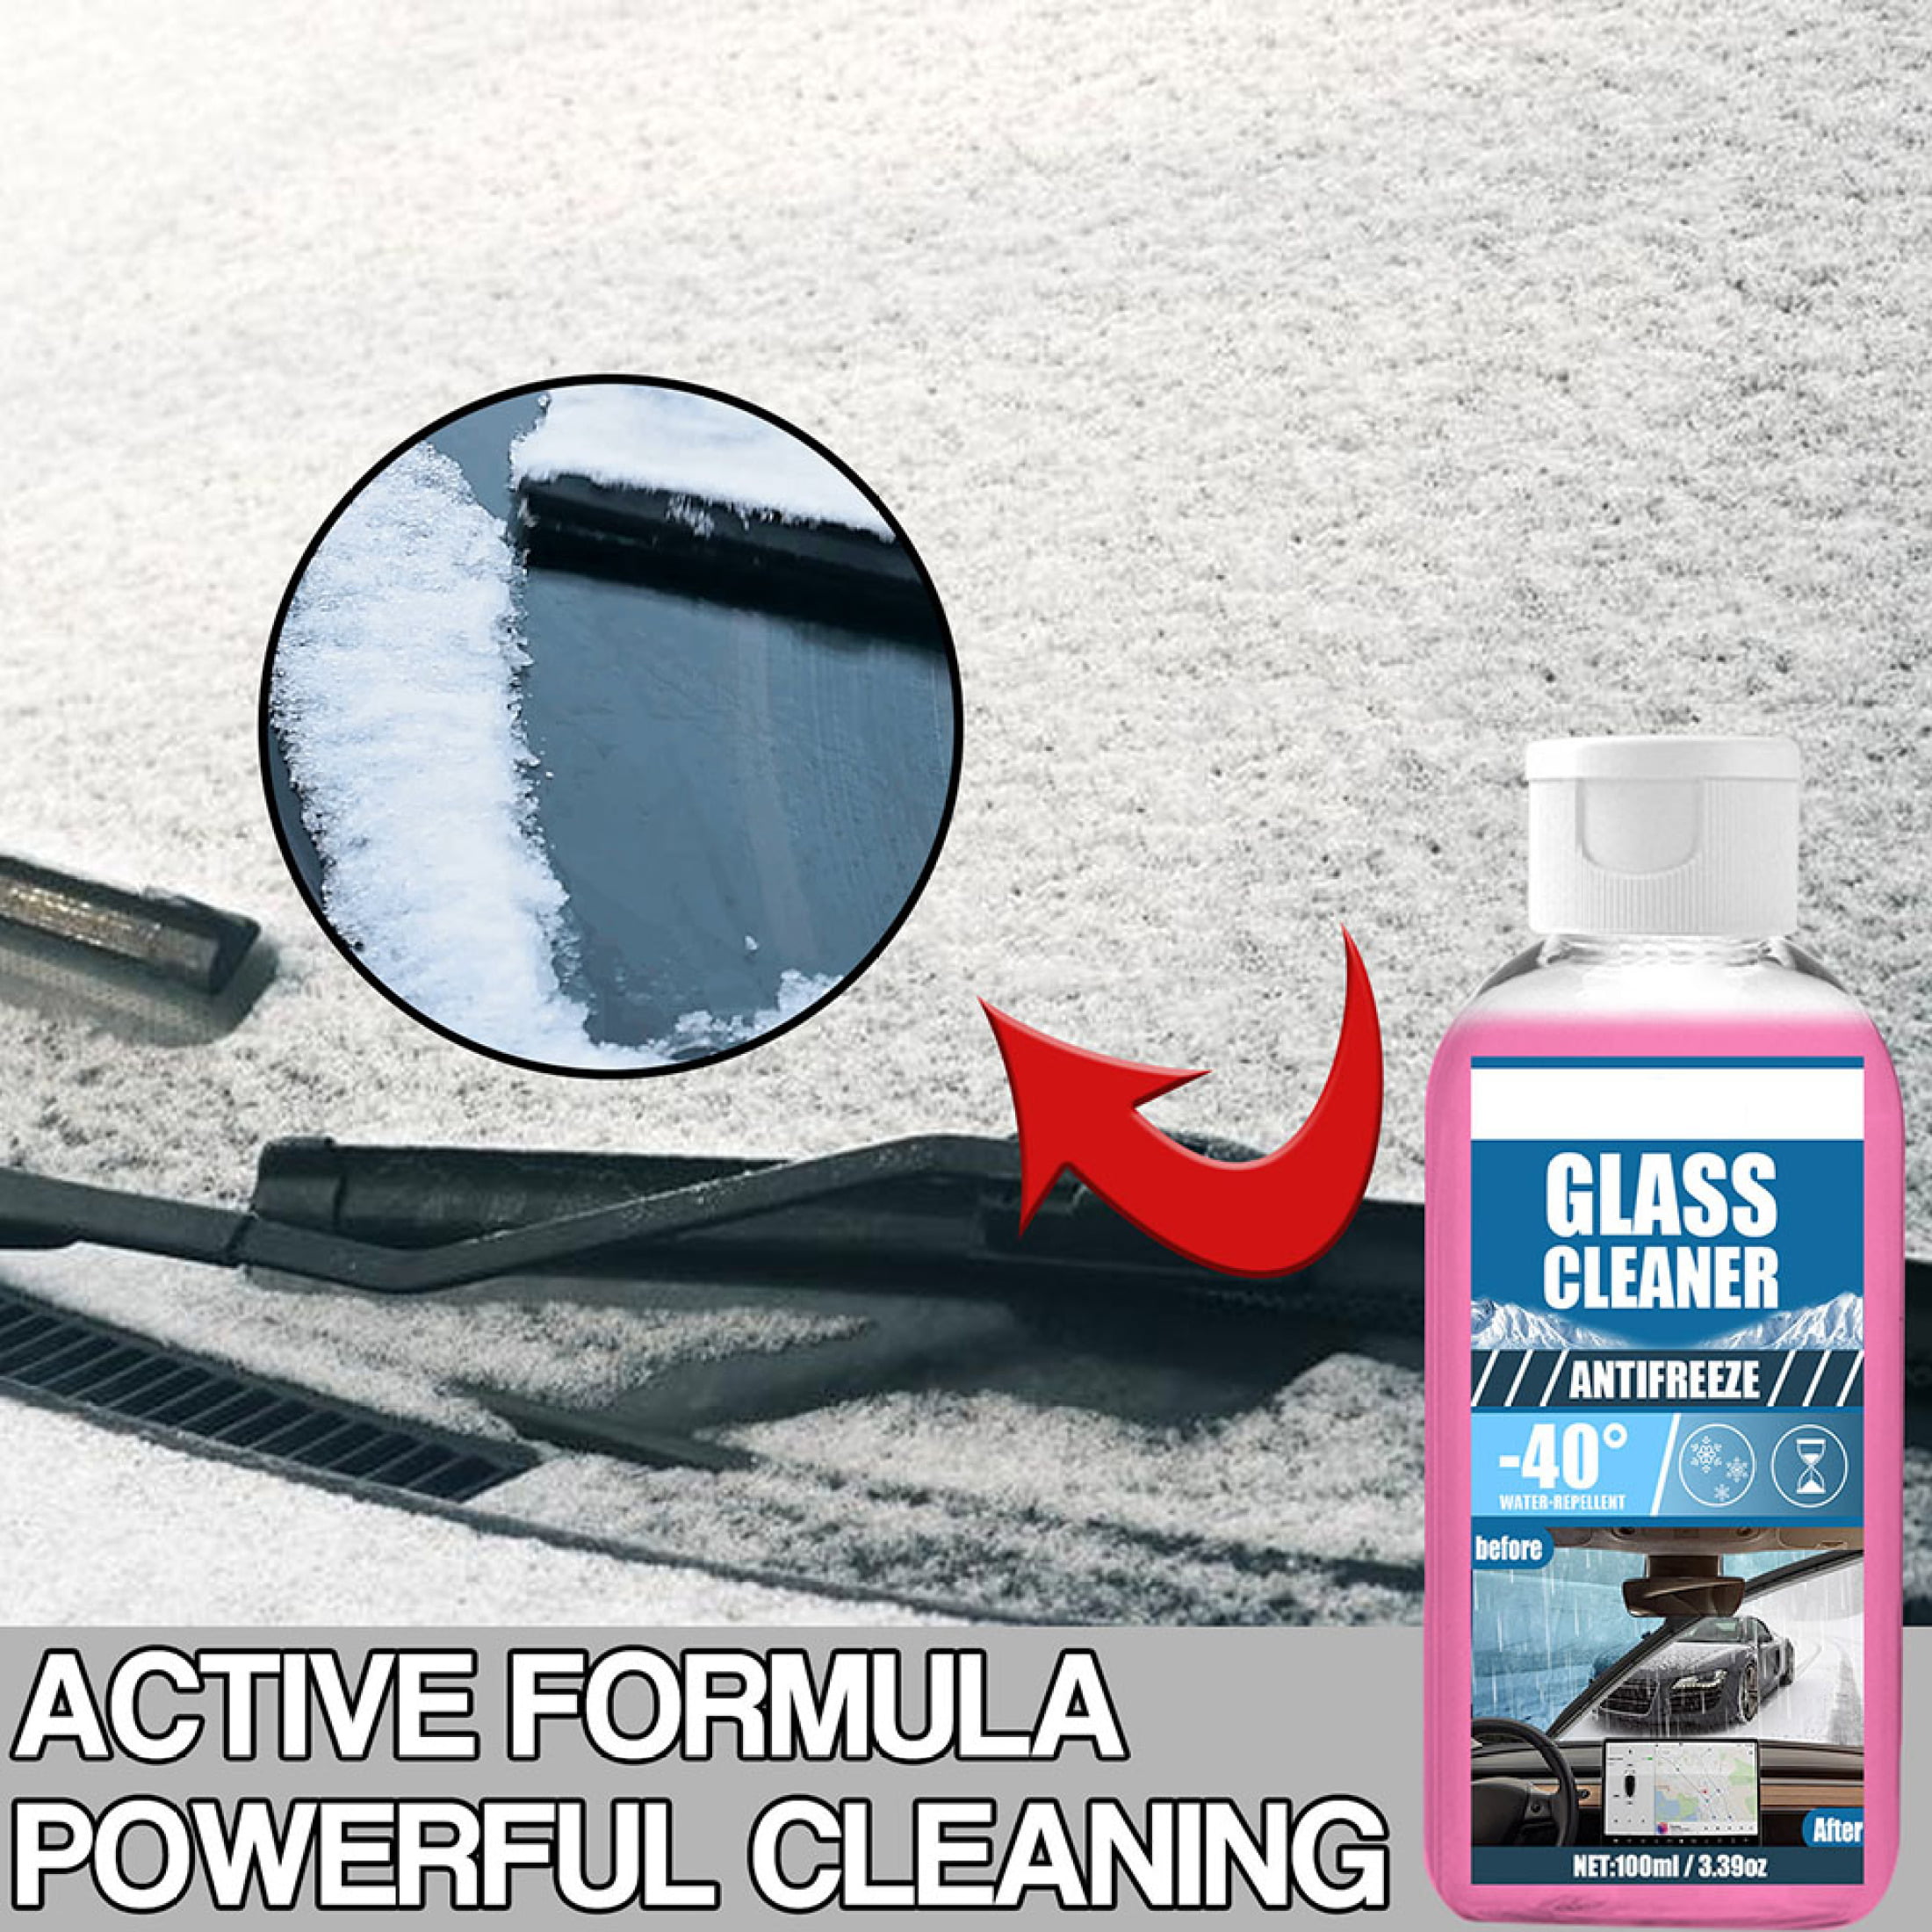  Car Glass Cleaner Water Repellent, Car Engine Cleaner and  Degreaser Spray, Car Windshield Cleaner Fluid, Bilge Exterior Degreasing  Decontamination No Cleaning Oil Film Spray Cleaner : Sports & Outdoors